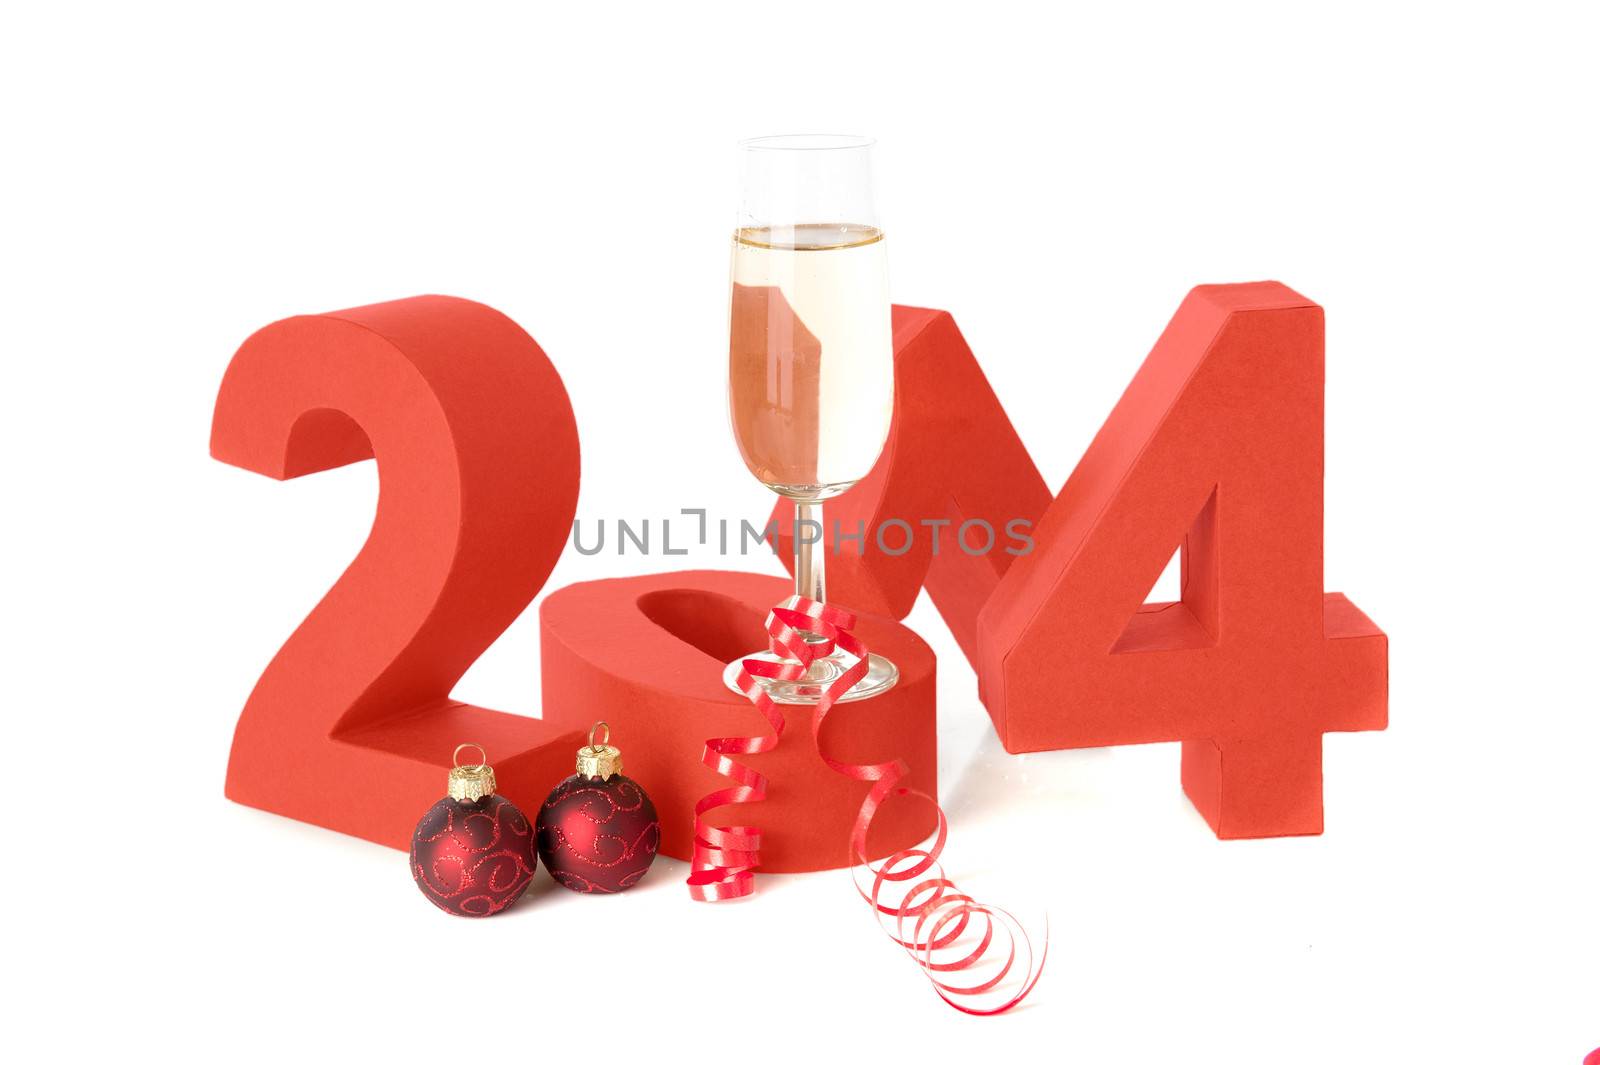 The year 2014, celebrating new year with champagne!